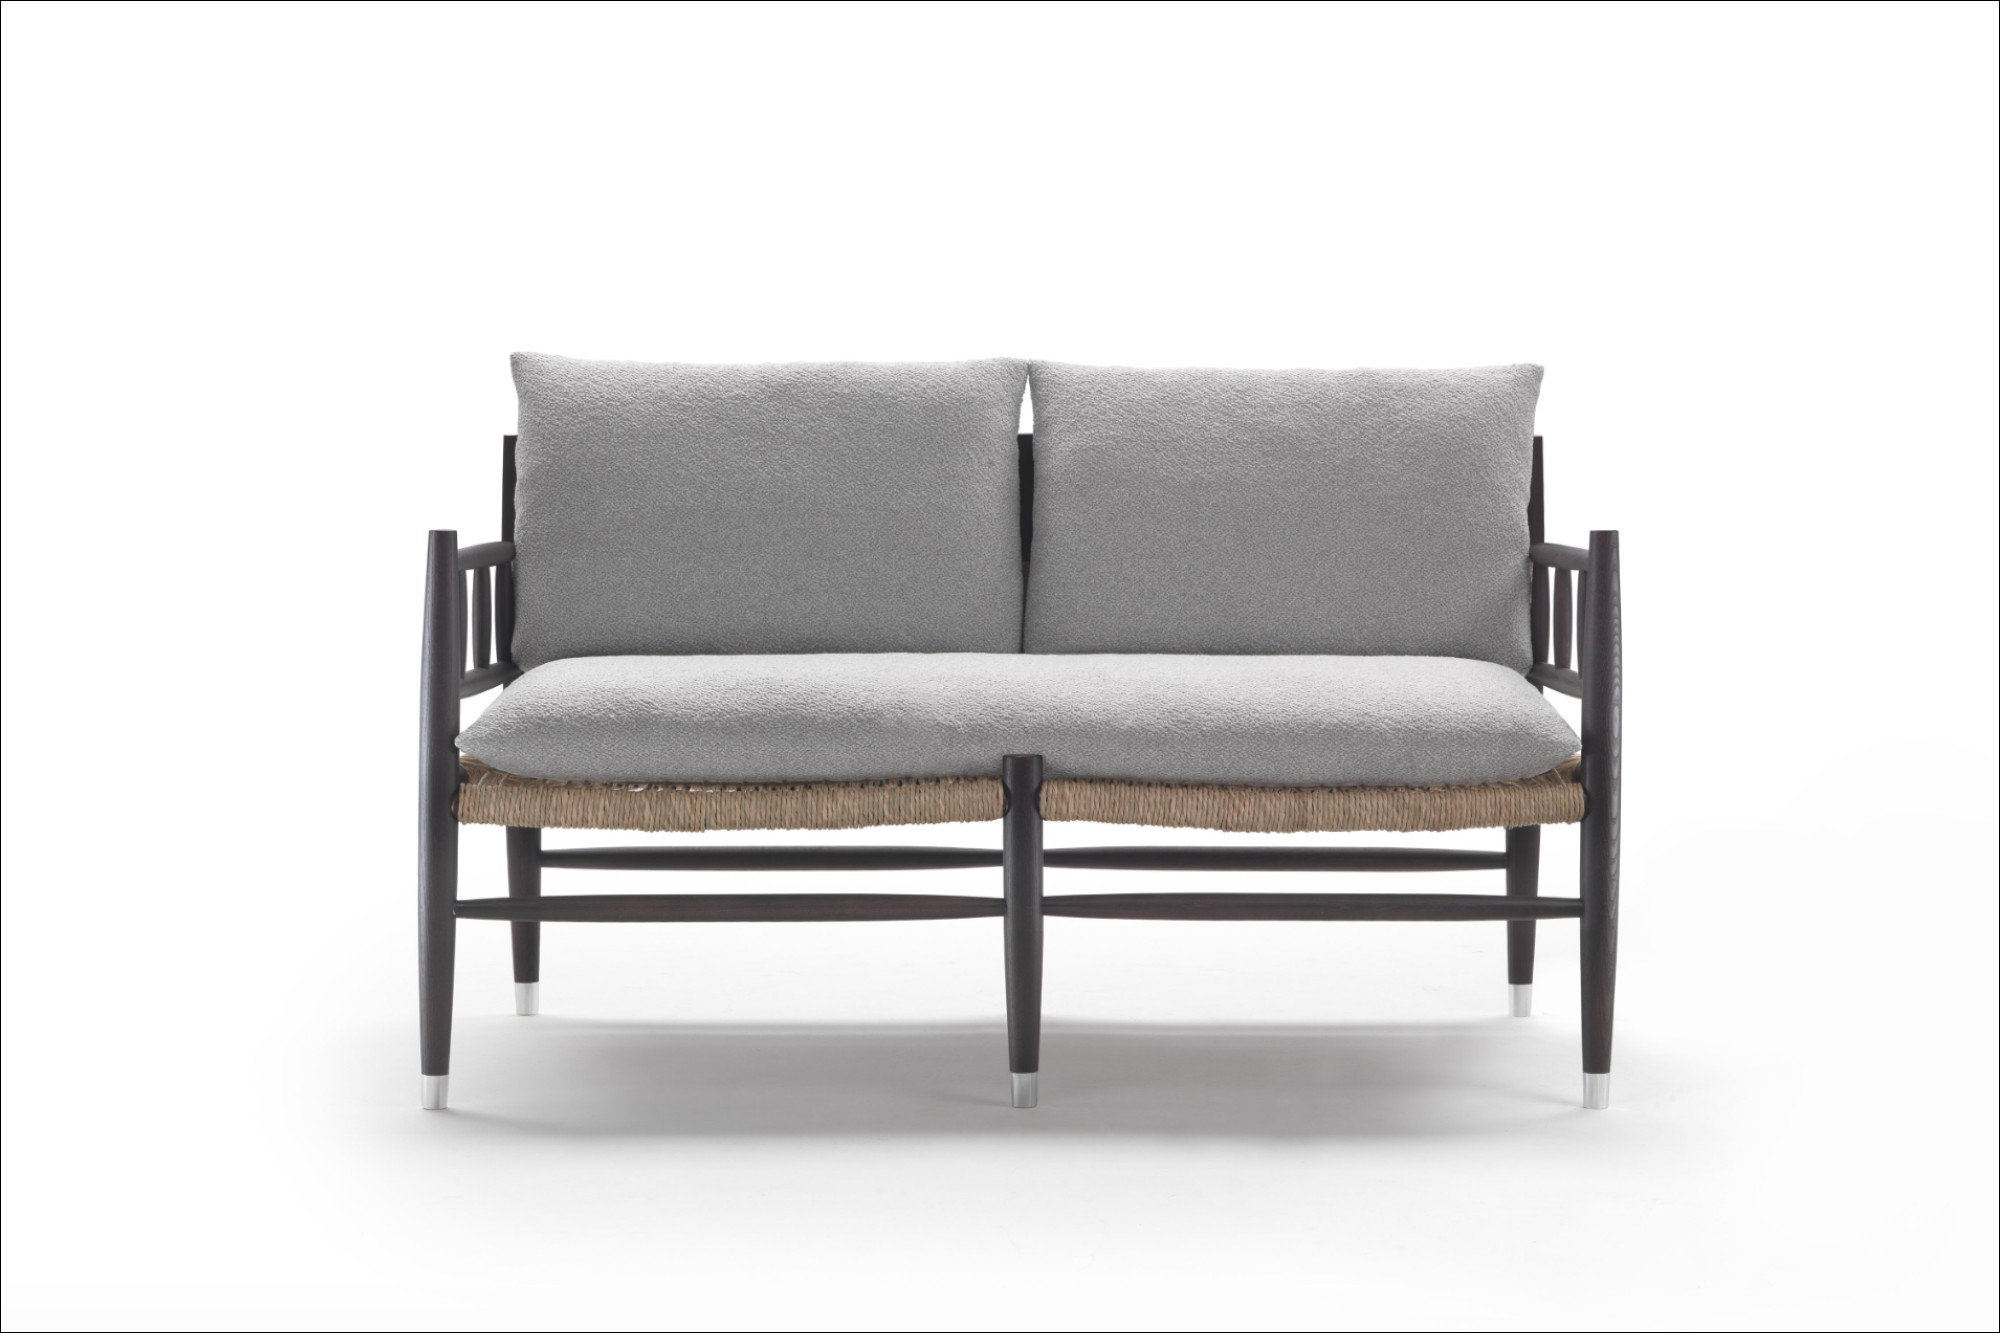 Etreluxe unveils the Lee Armchair collection